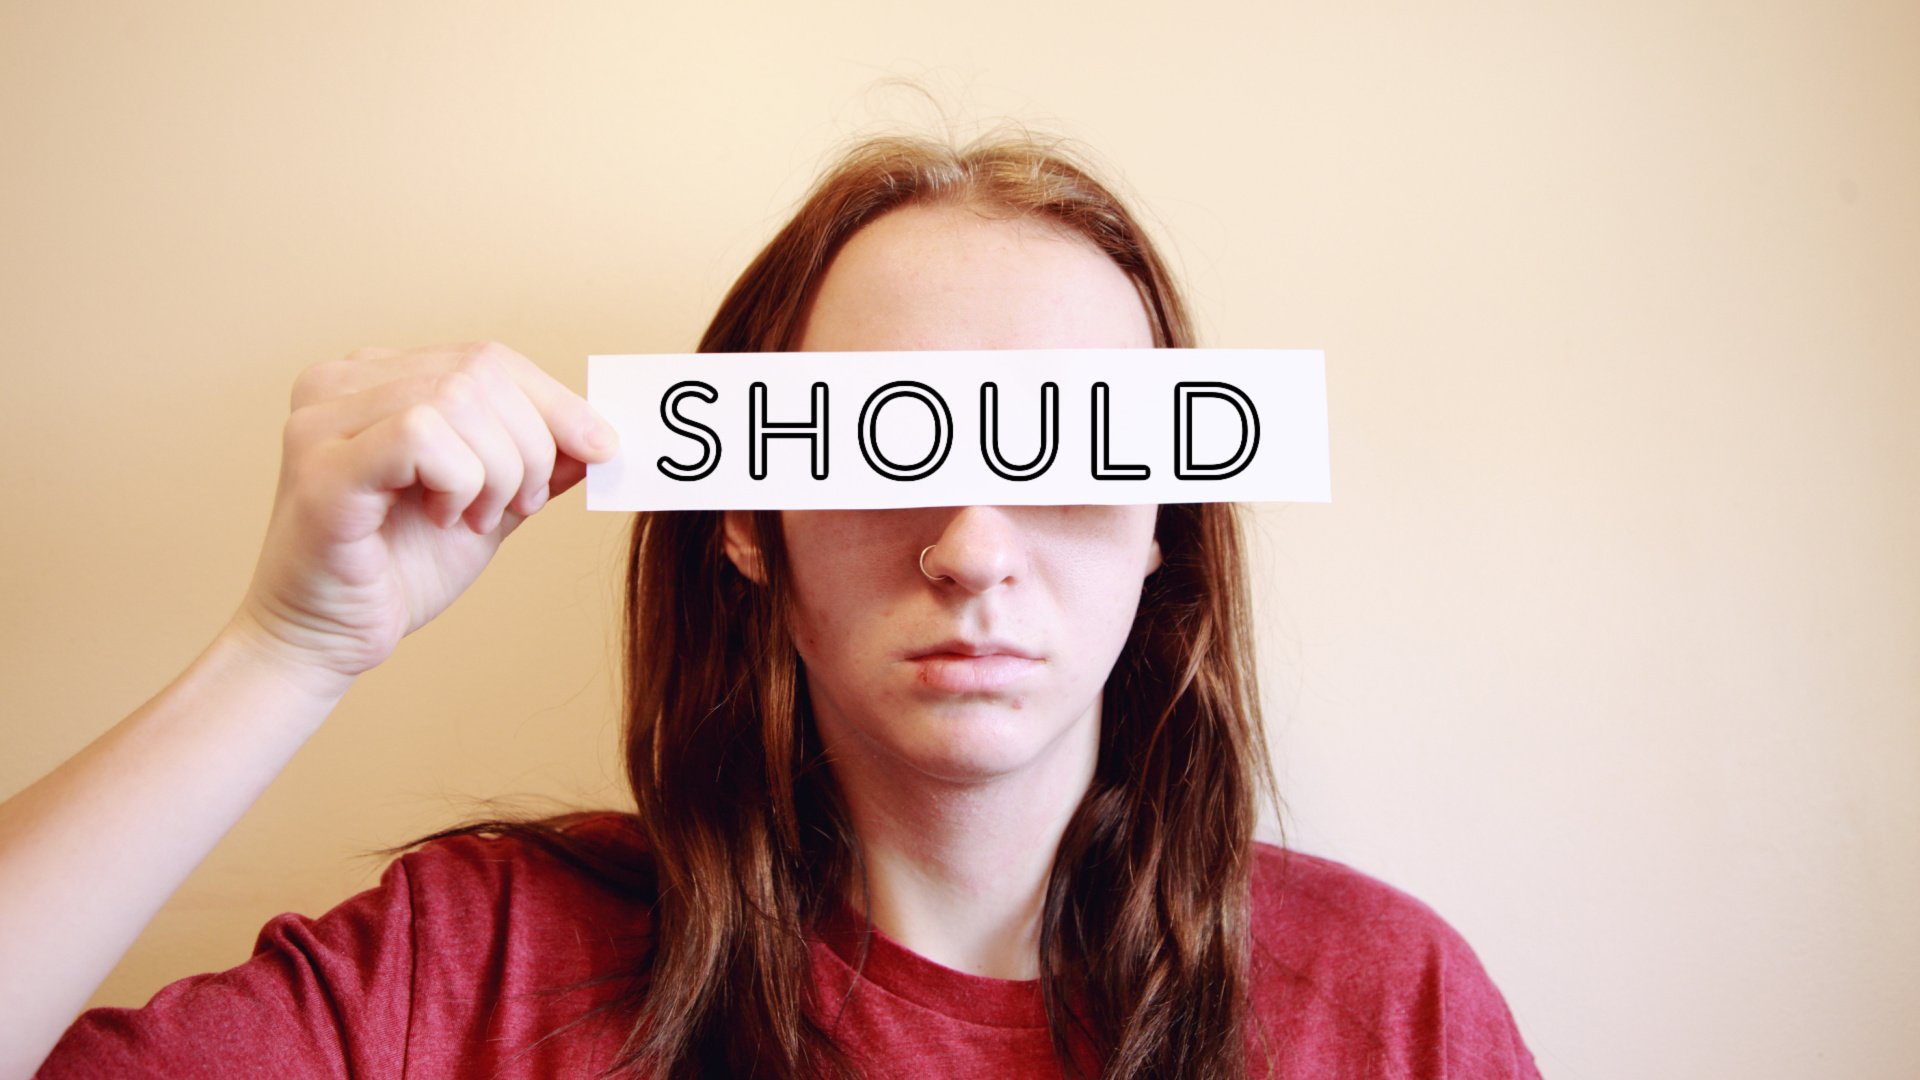 A person holding a narrow white piece of paper that covers only their eyes and the paper says "SHOULD" on it.